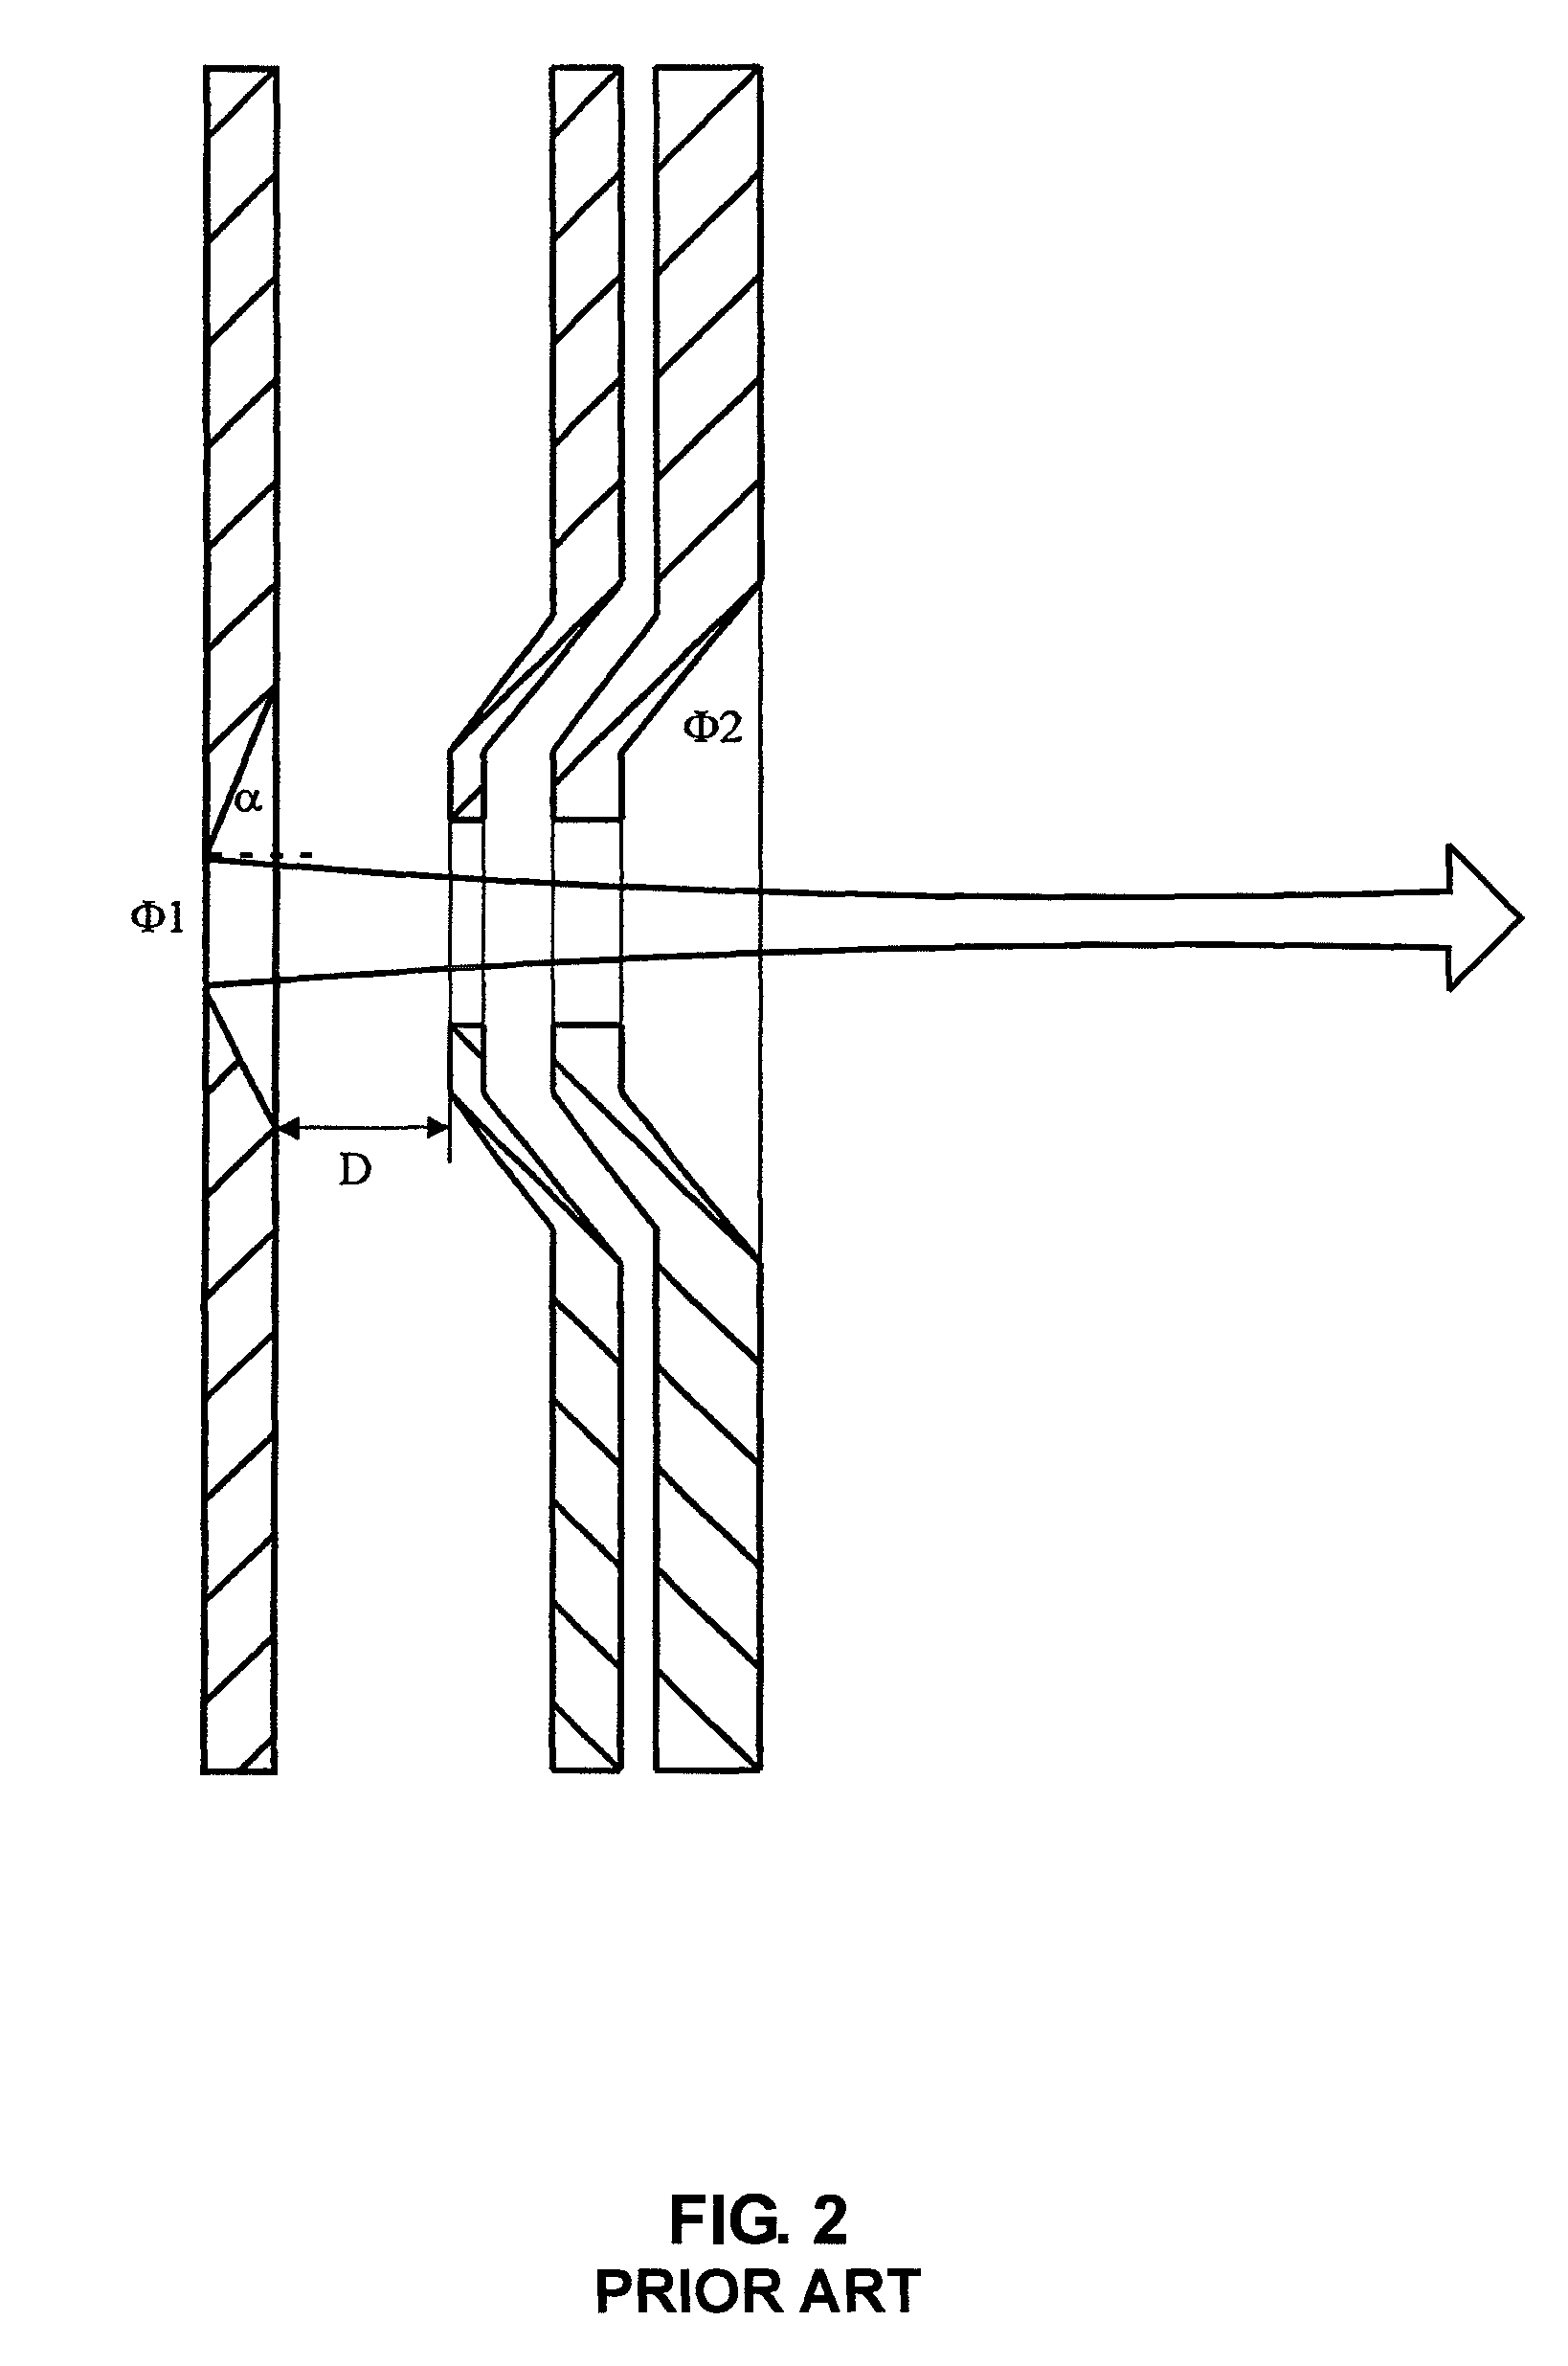 Method and system for extracting ion beams composed of molecular ions (cluster ion beam extraction system)